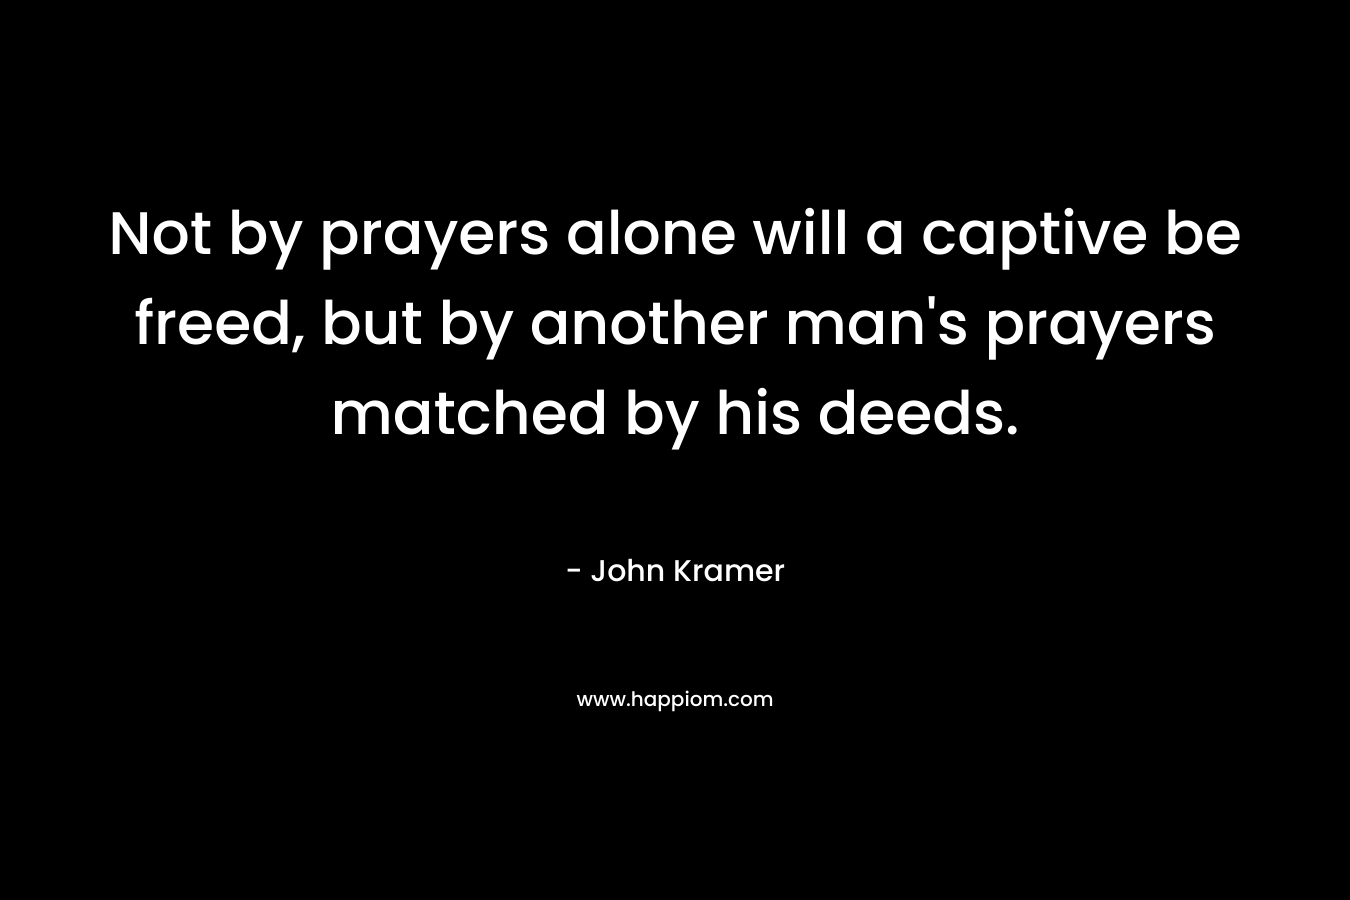 Not by prayers alone will a captive be freed, but by another man's prayers matched by his deeds.